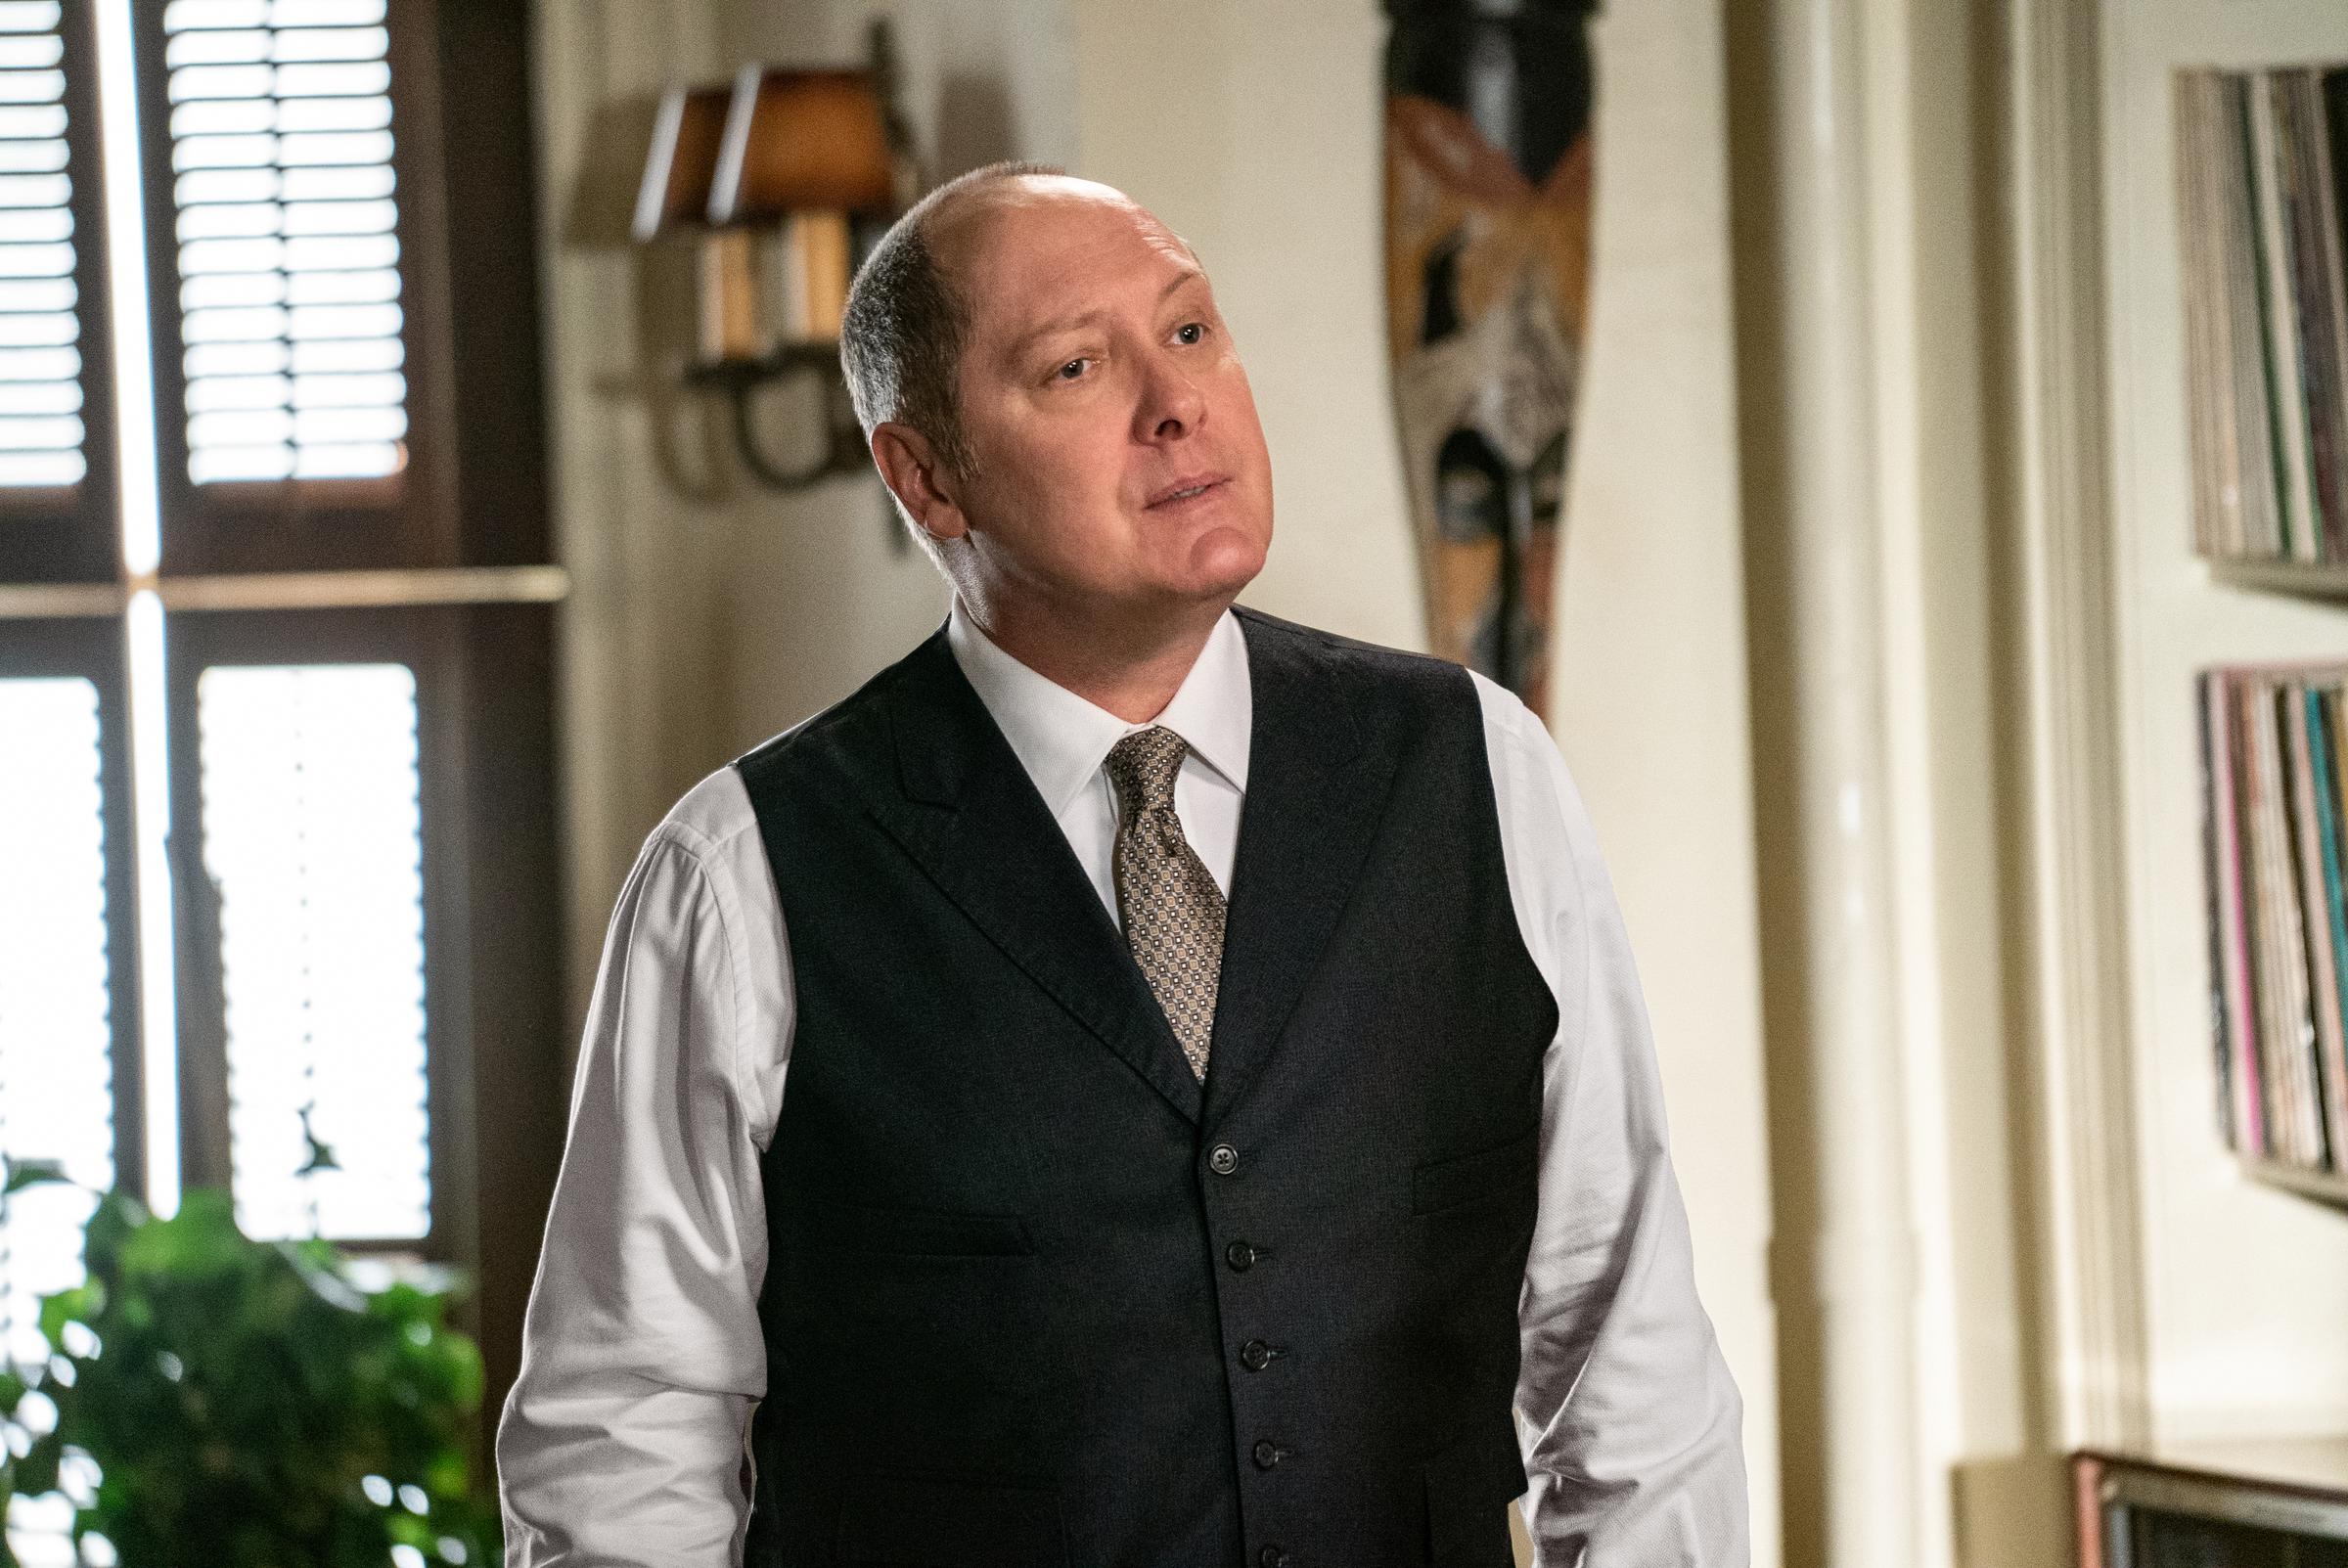 James Spader as Raymond "Red" Reddington in season 6 of "The Blacklist" in 2019 | Source: Getty Images